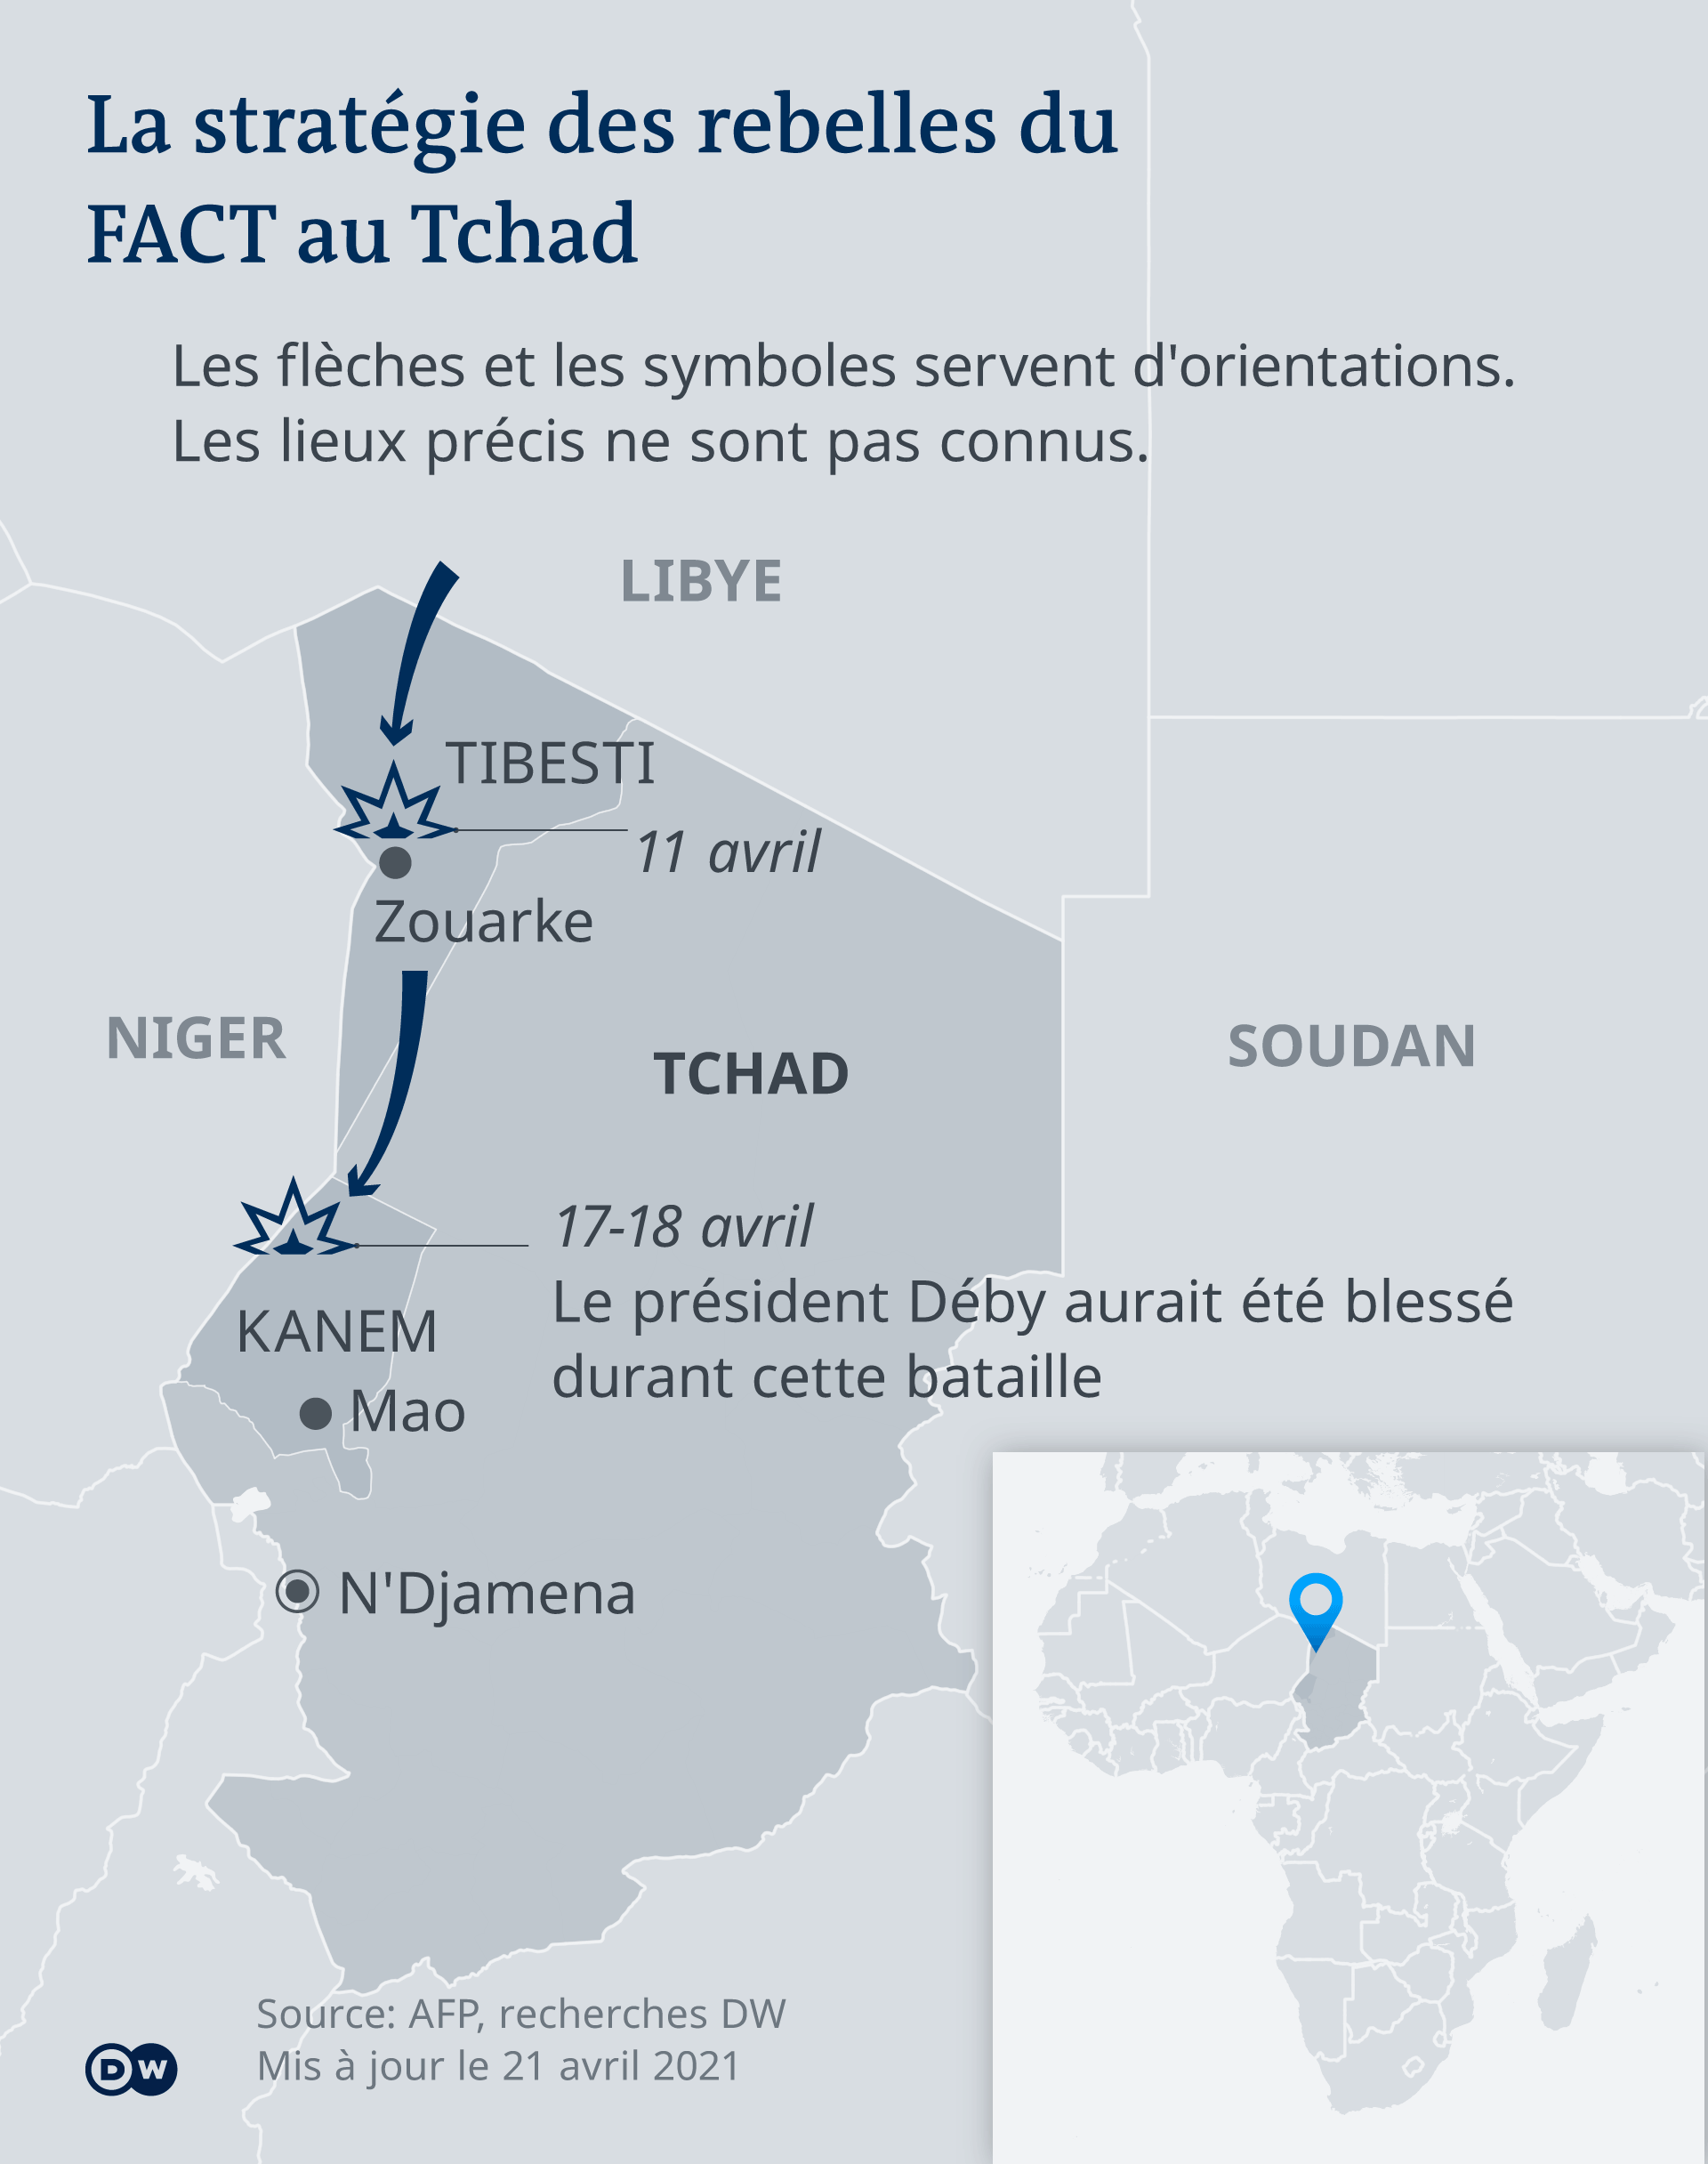 Infographic: The strategy of the FACT rebels in Chad. 